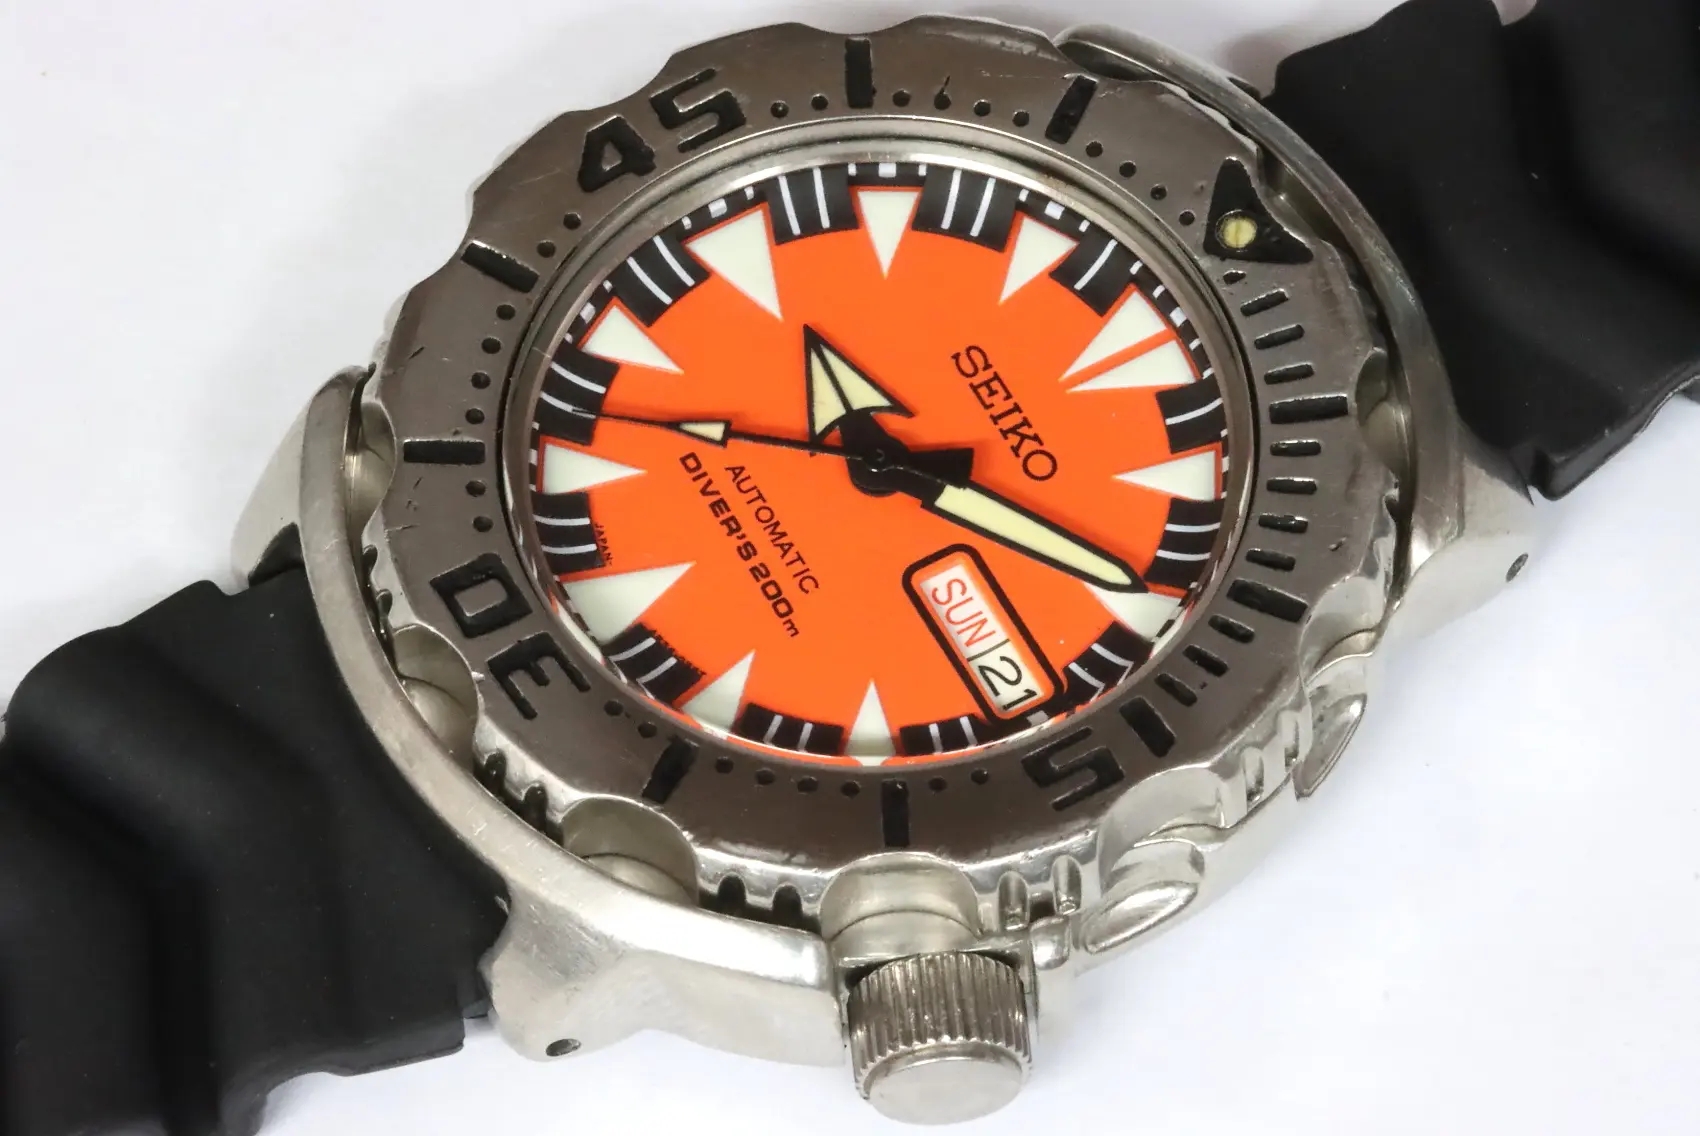 Seiko 7S26-0350 automatic monster diver's watch